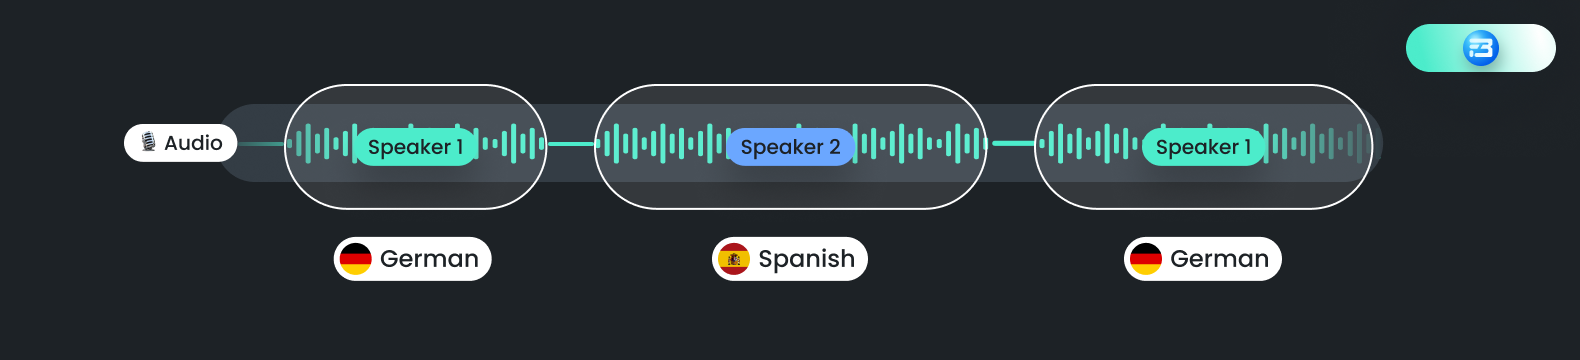 Language identification is essential for accurate audio transcription. Discover the tools and techniques used to identify spoken languages.